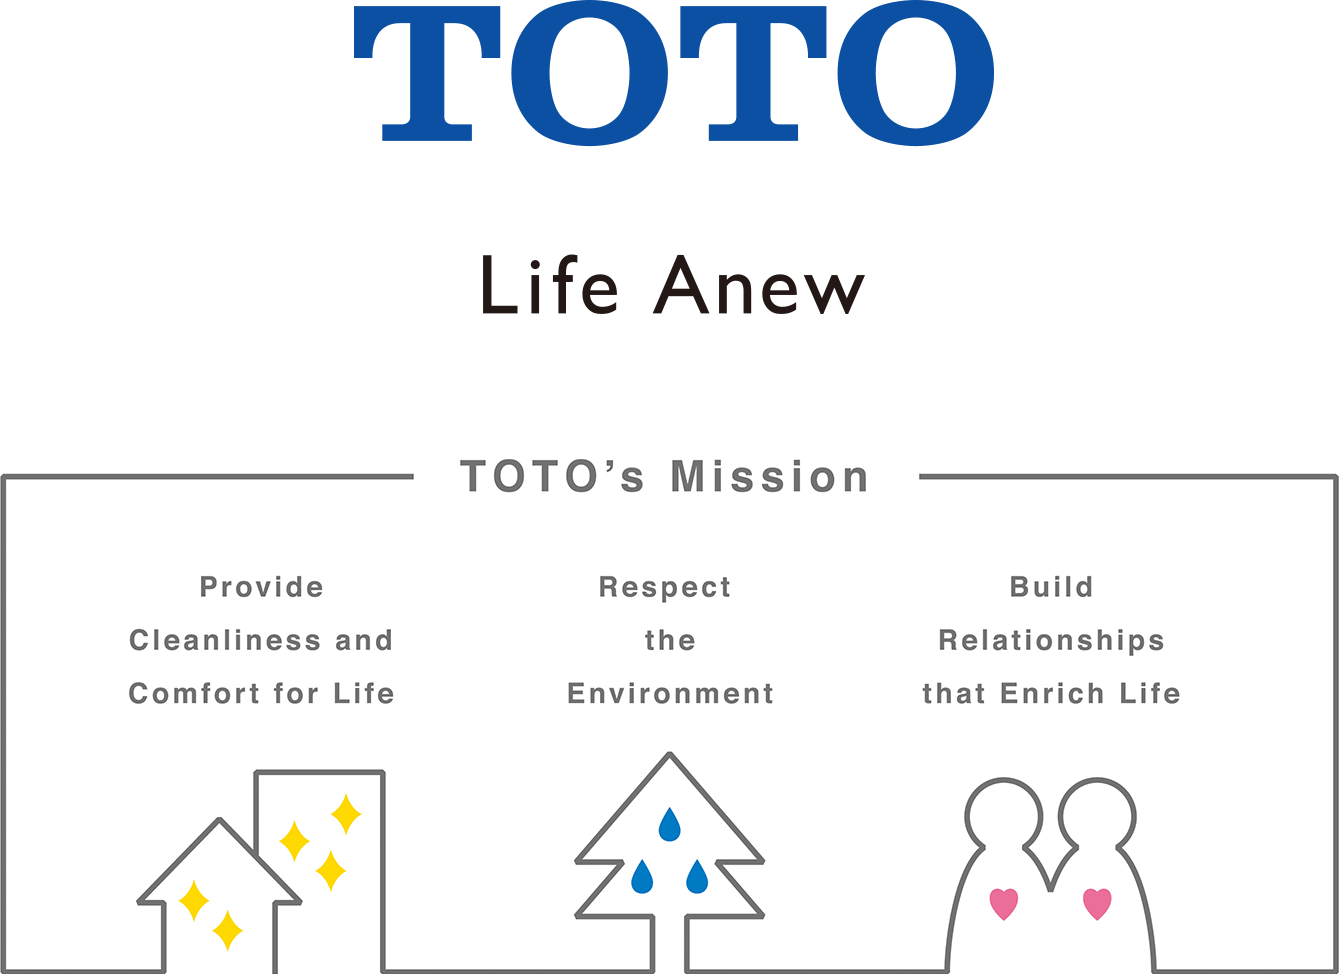 TOTO's Mission: Provide cleanliness and comfort for life, Respect the Environment, and Build relationships that enrich life